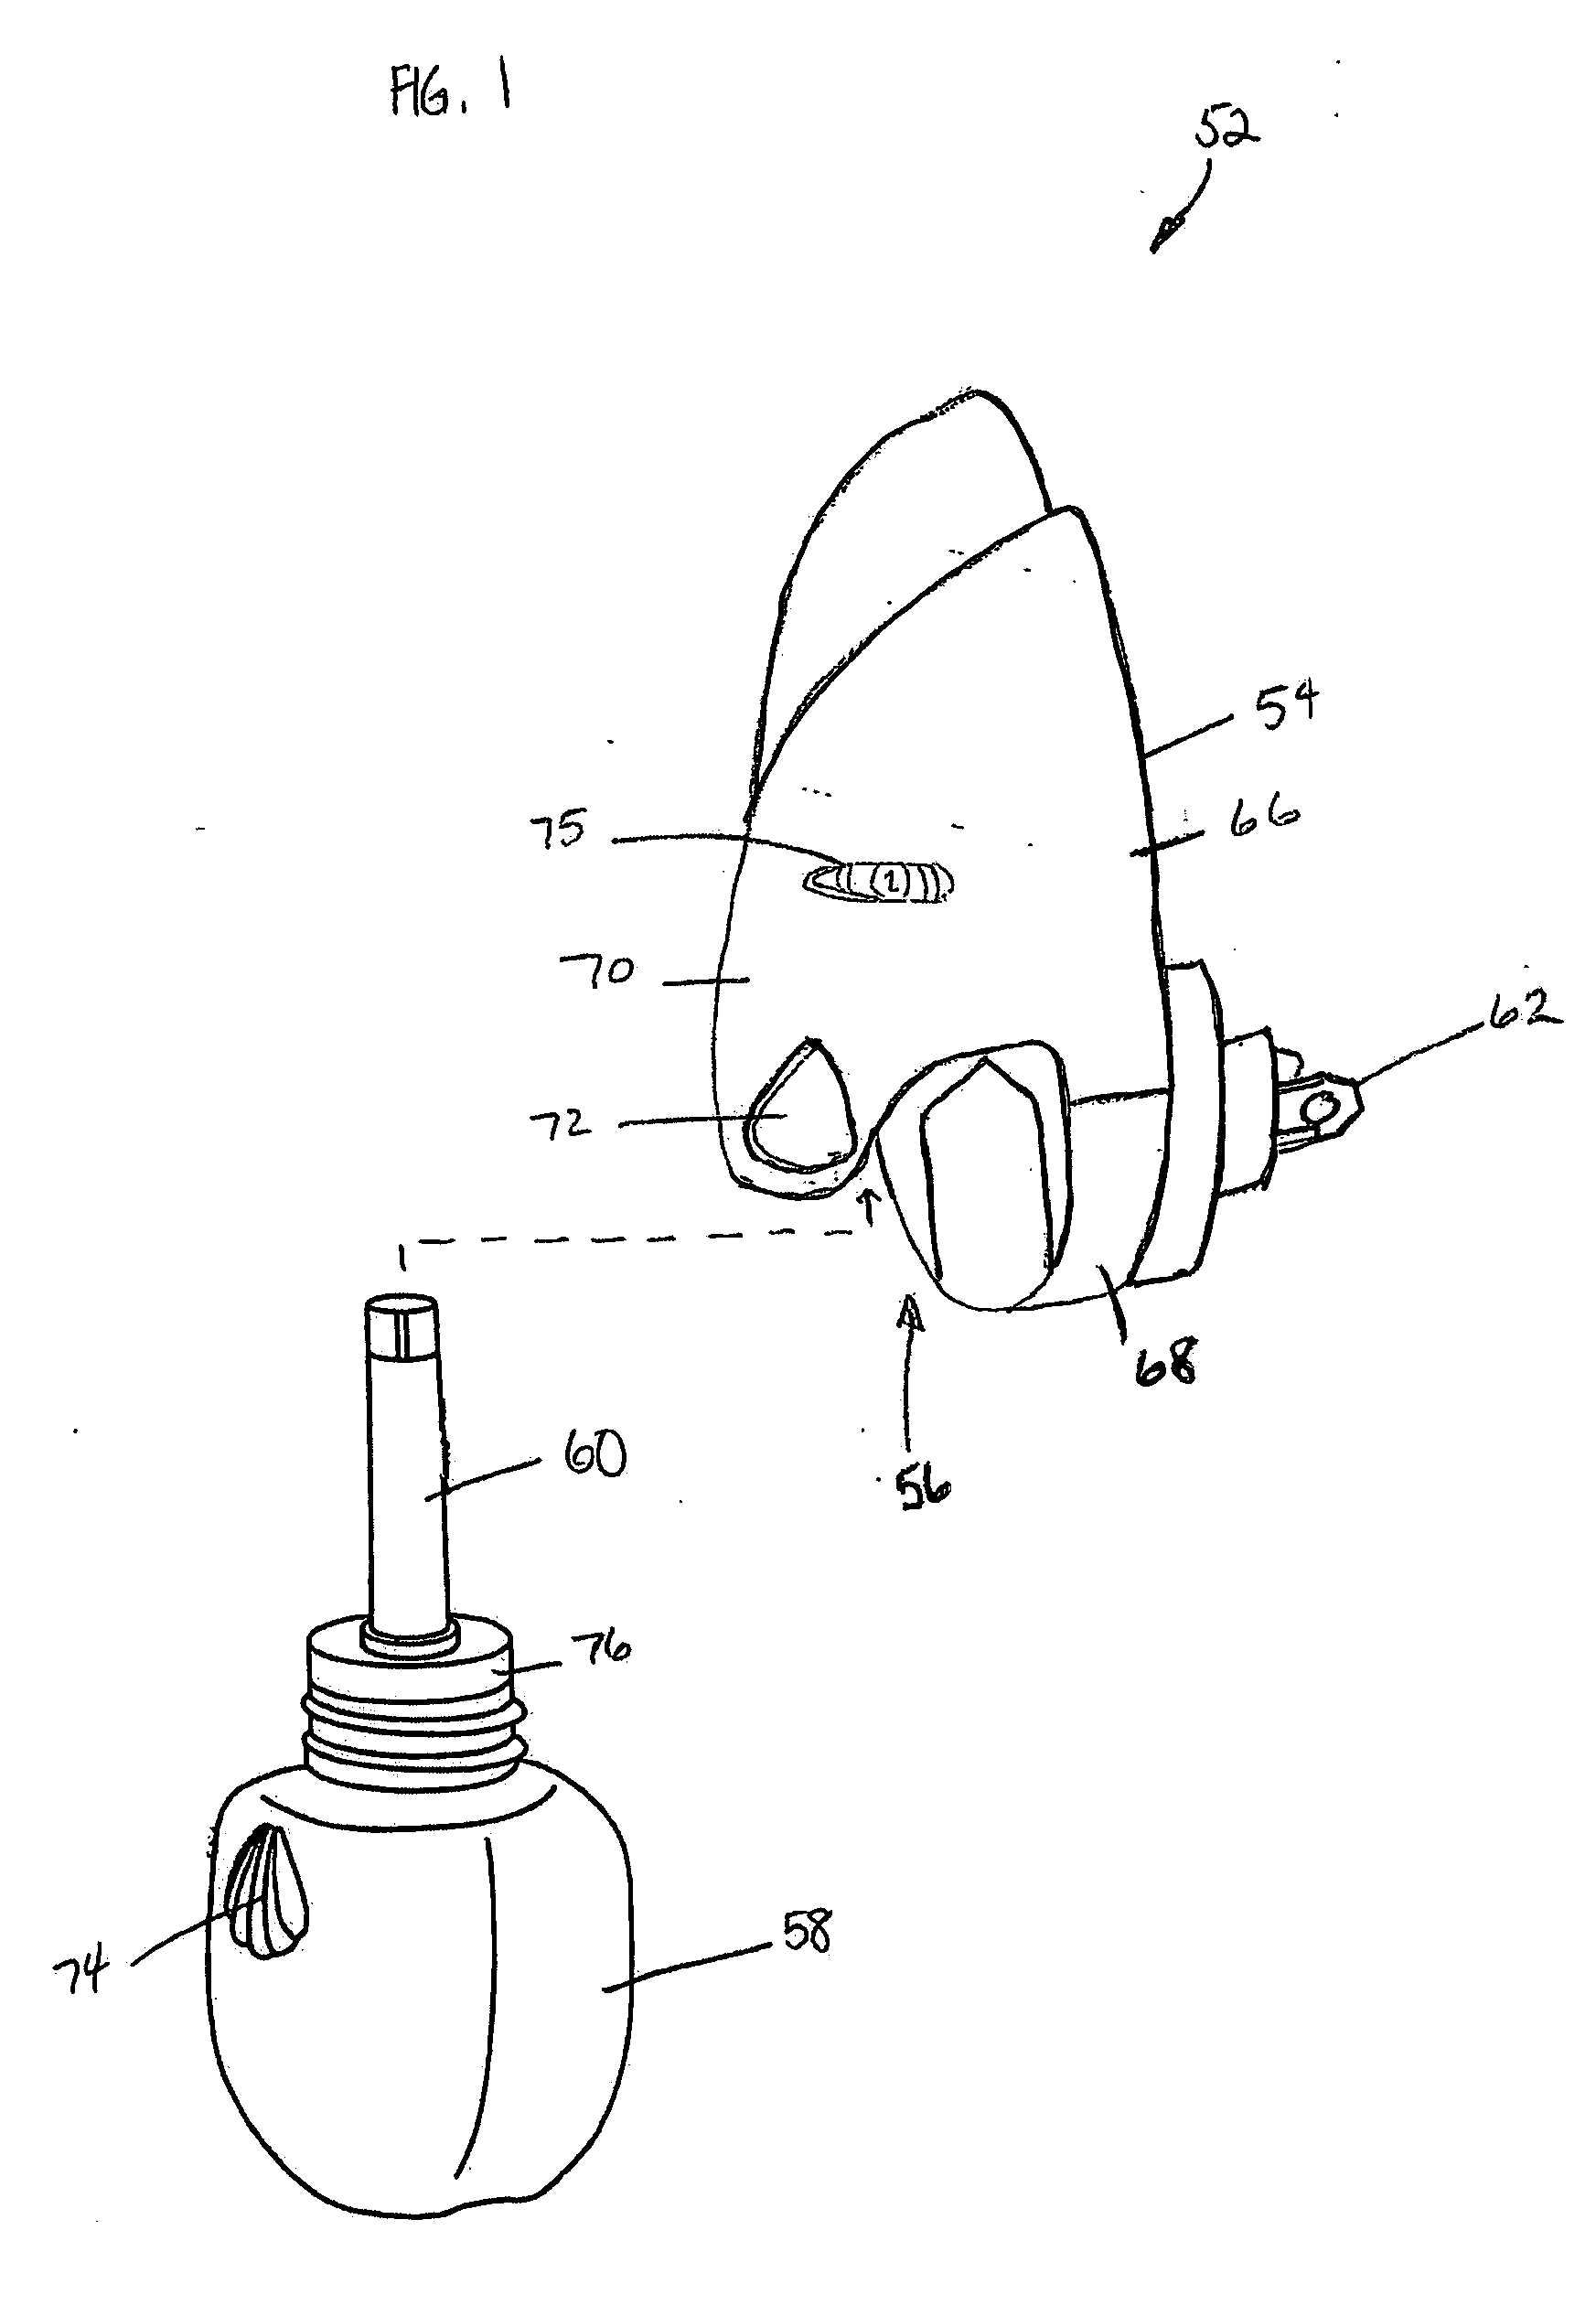 System for detecting a container or contents of the container